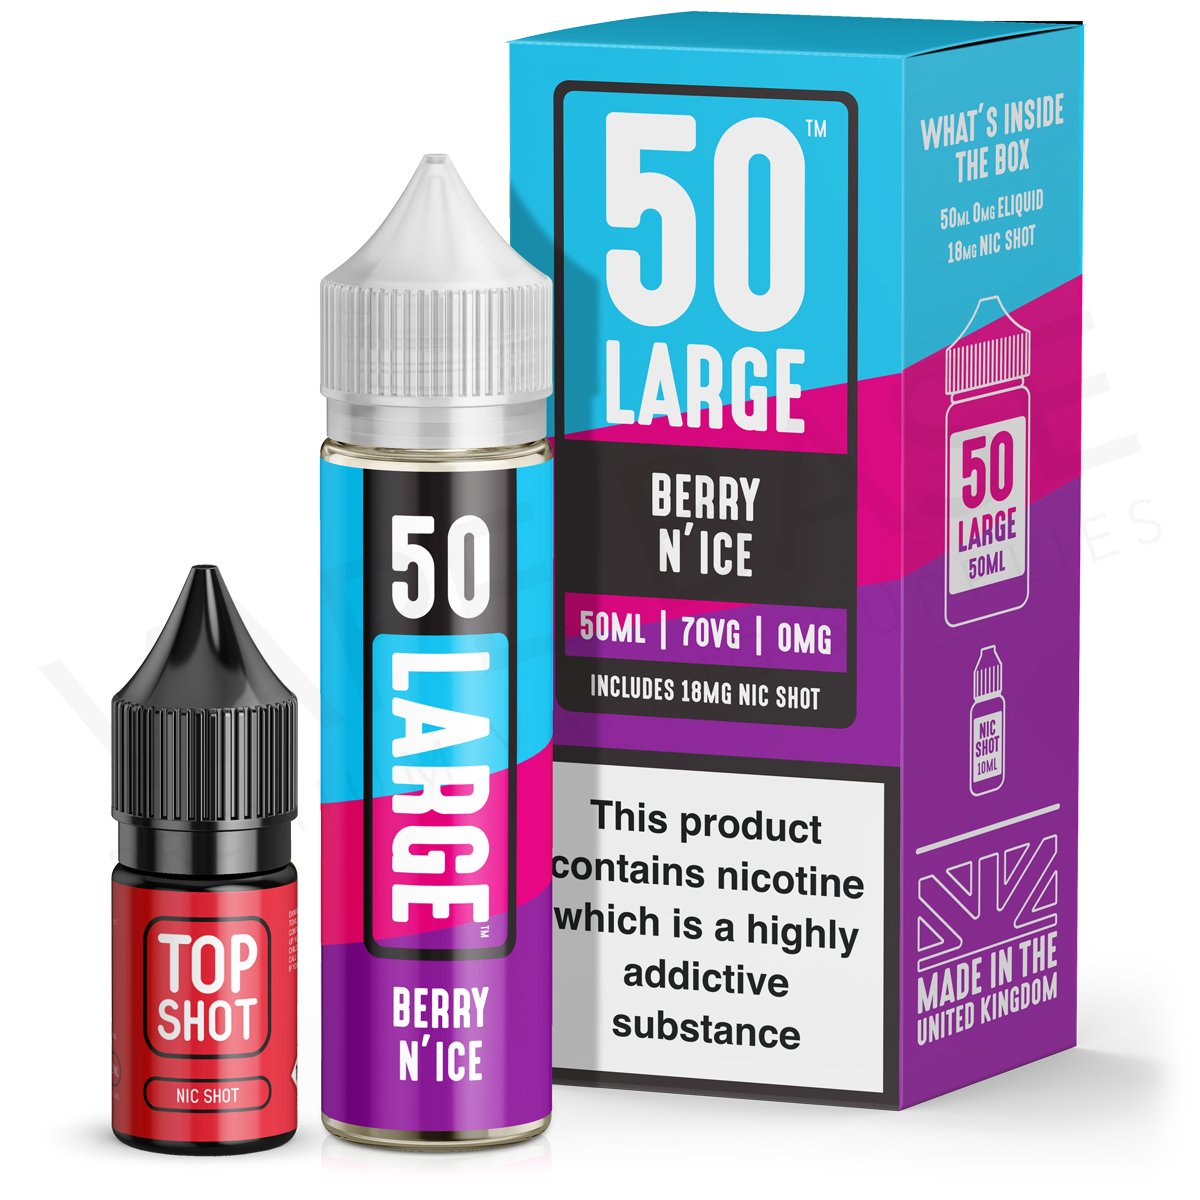 Berry N'ice E-Liquid by 50 Large